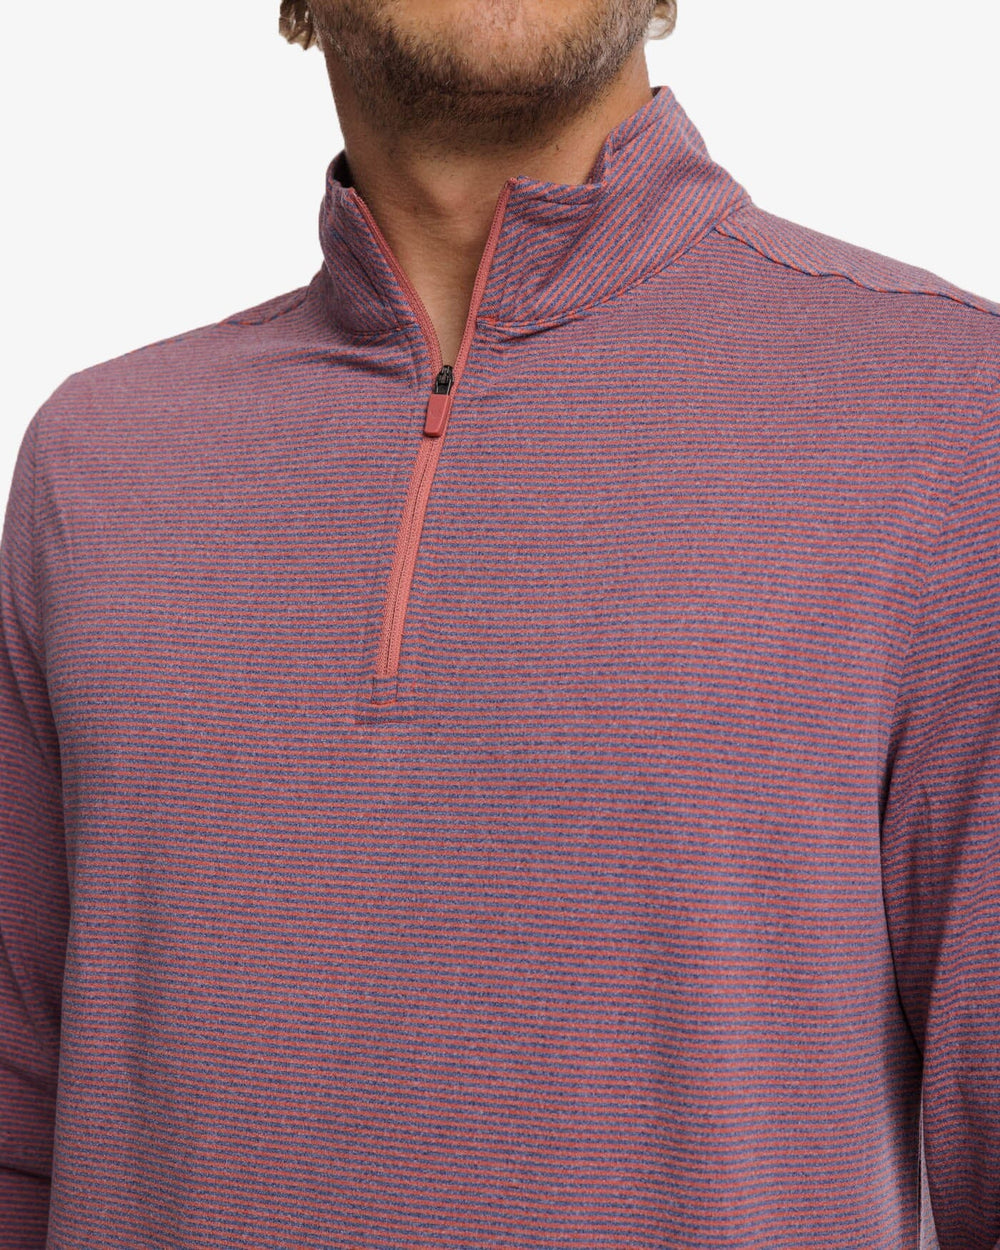 The detail view of the Southern Tide Cruiser Heather Micro-Stripe Performance Quarter Zip Pullover by Southern Tide - Heather Dusty Coral